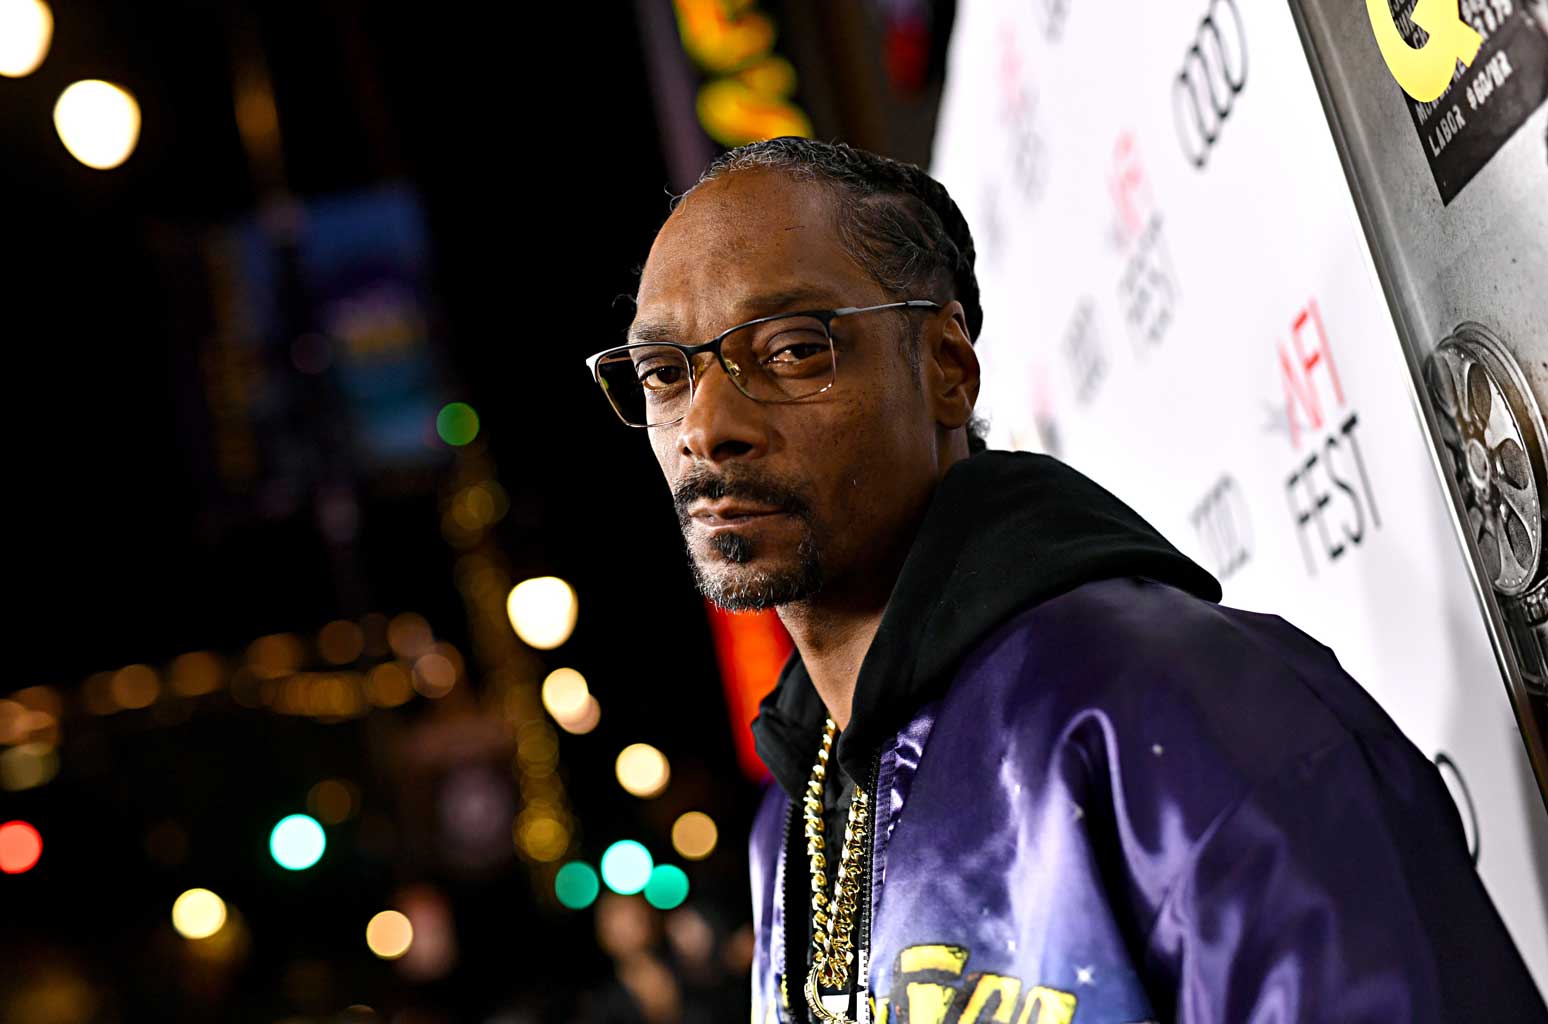 amazon, snoop dogg sues walmart & post, claiming they sabotaged his cereal brand